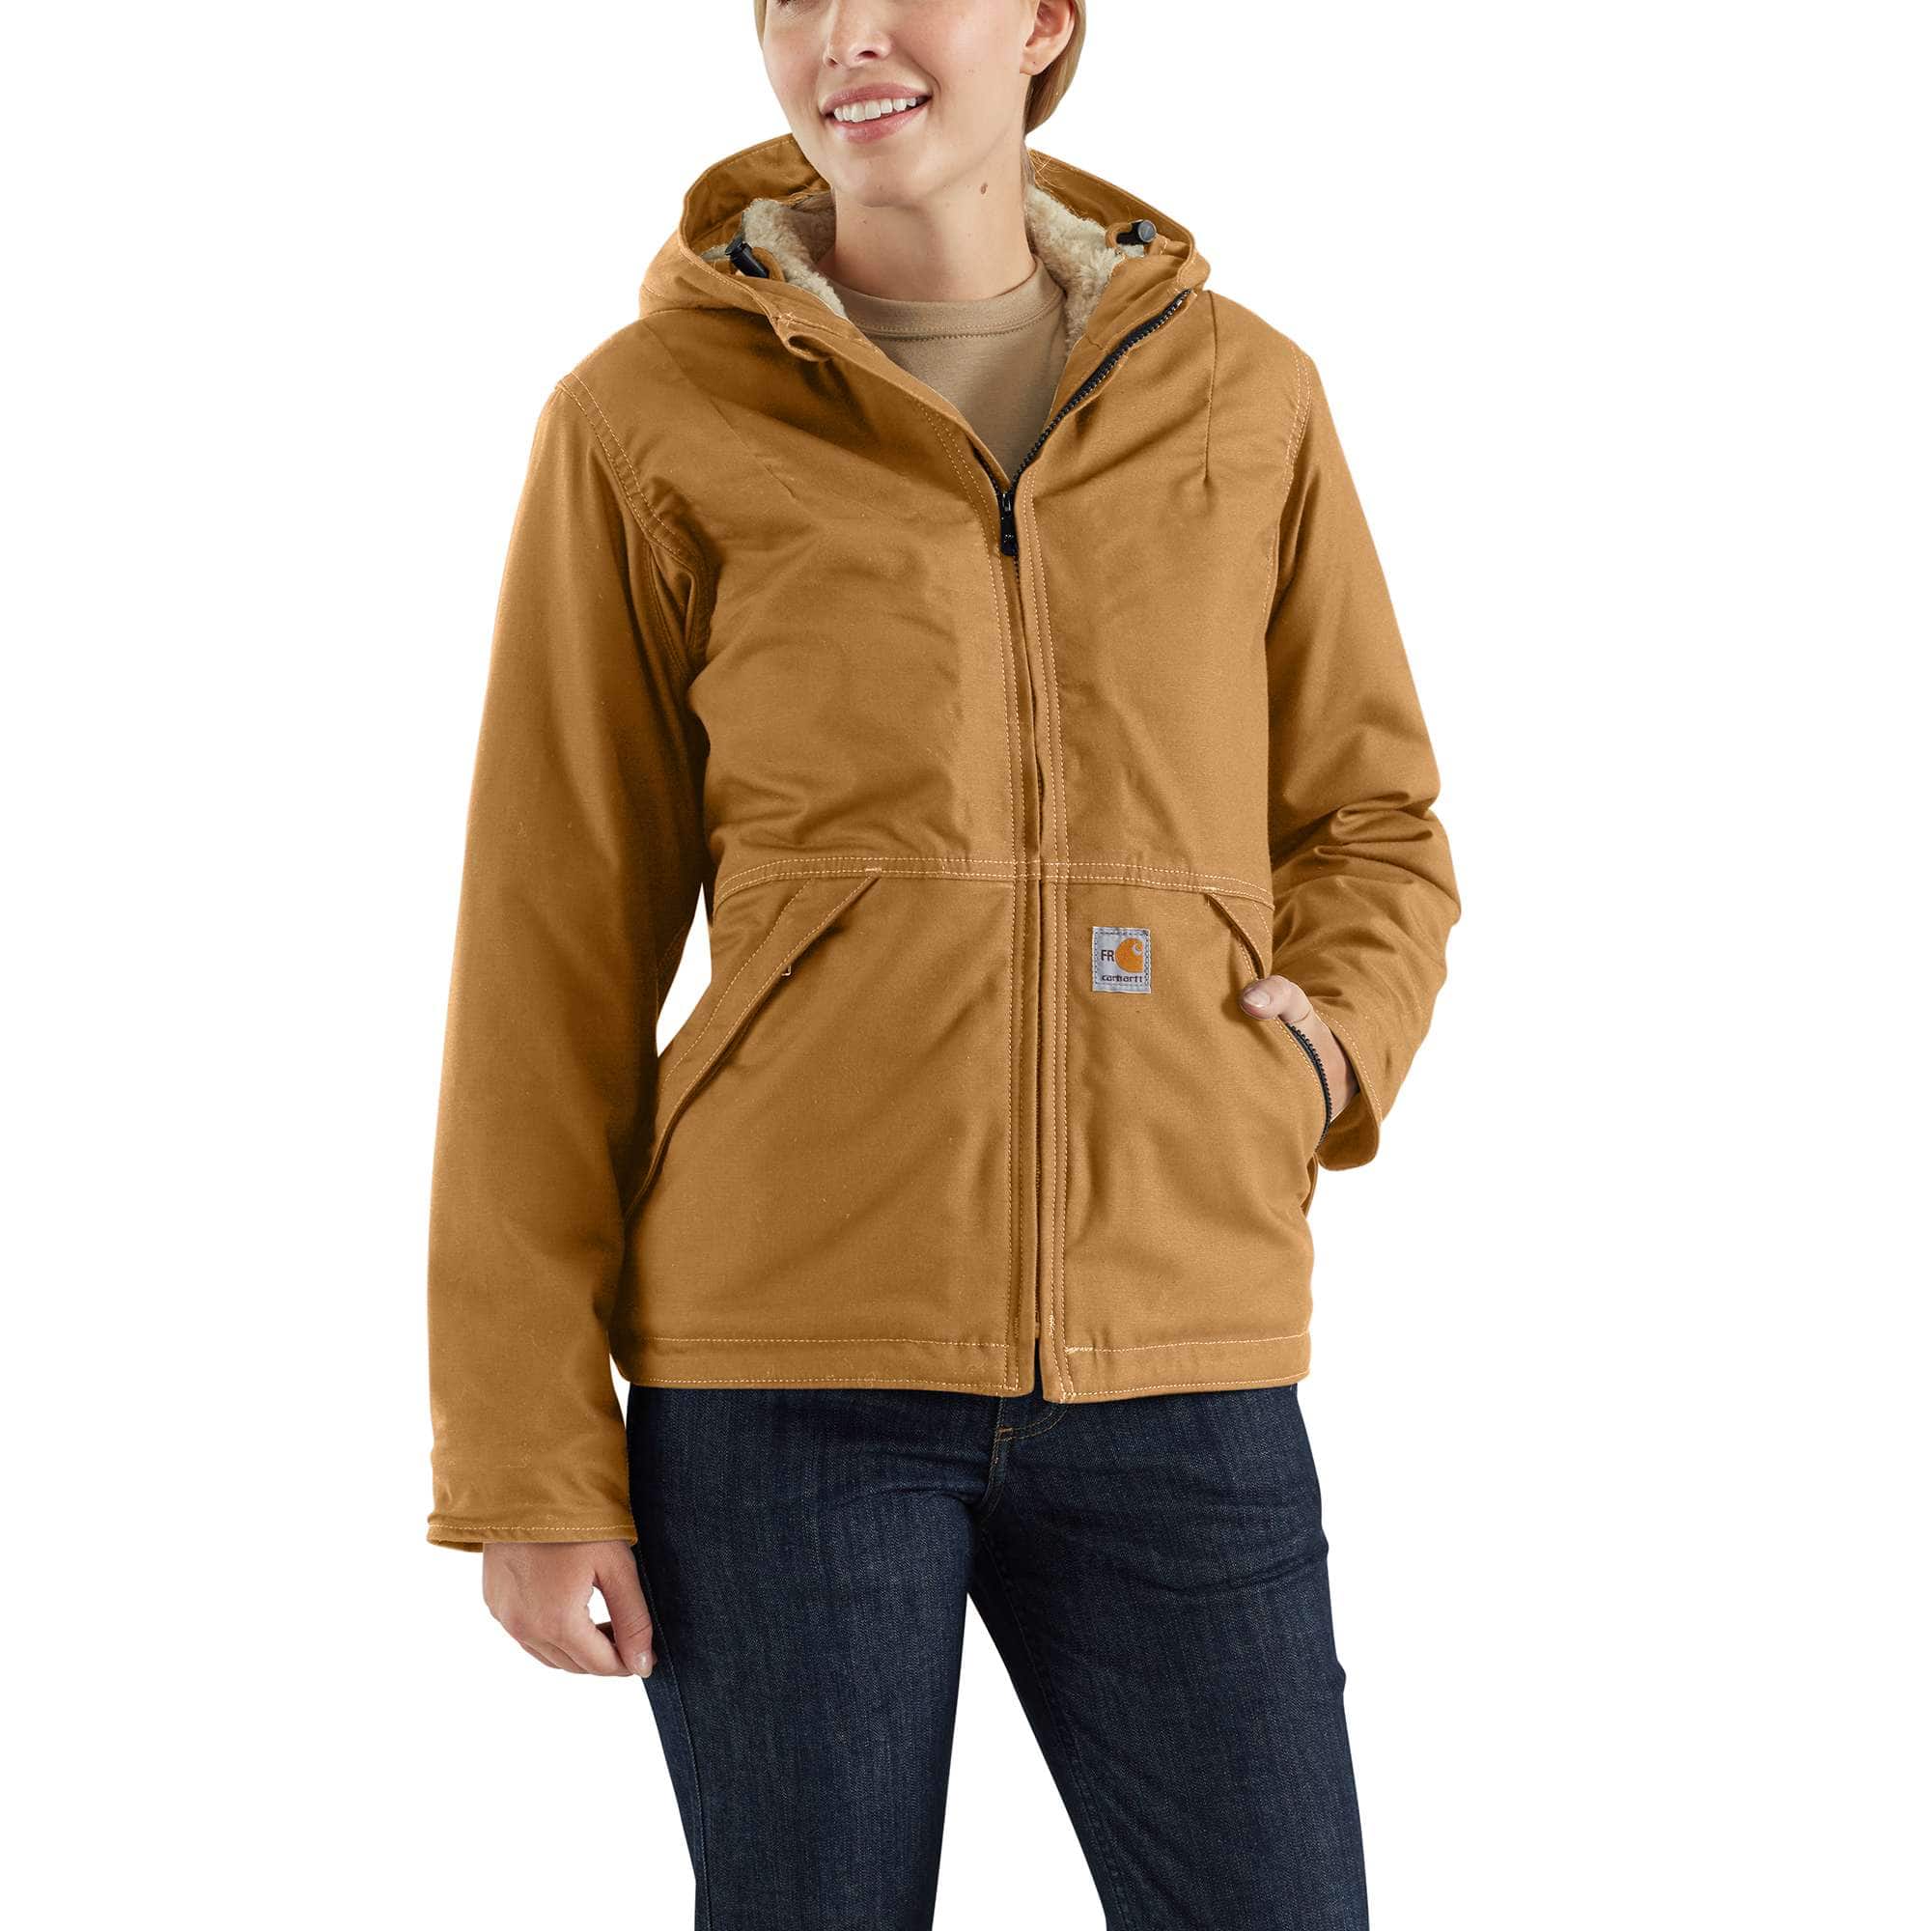 Knox® Heavy Duty FR Sherpa Lined Flame Resistant Gray Jacket